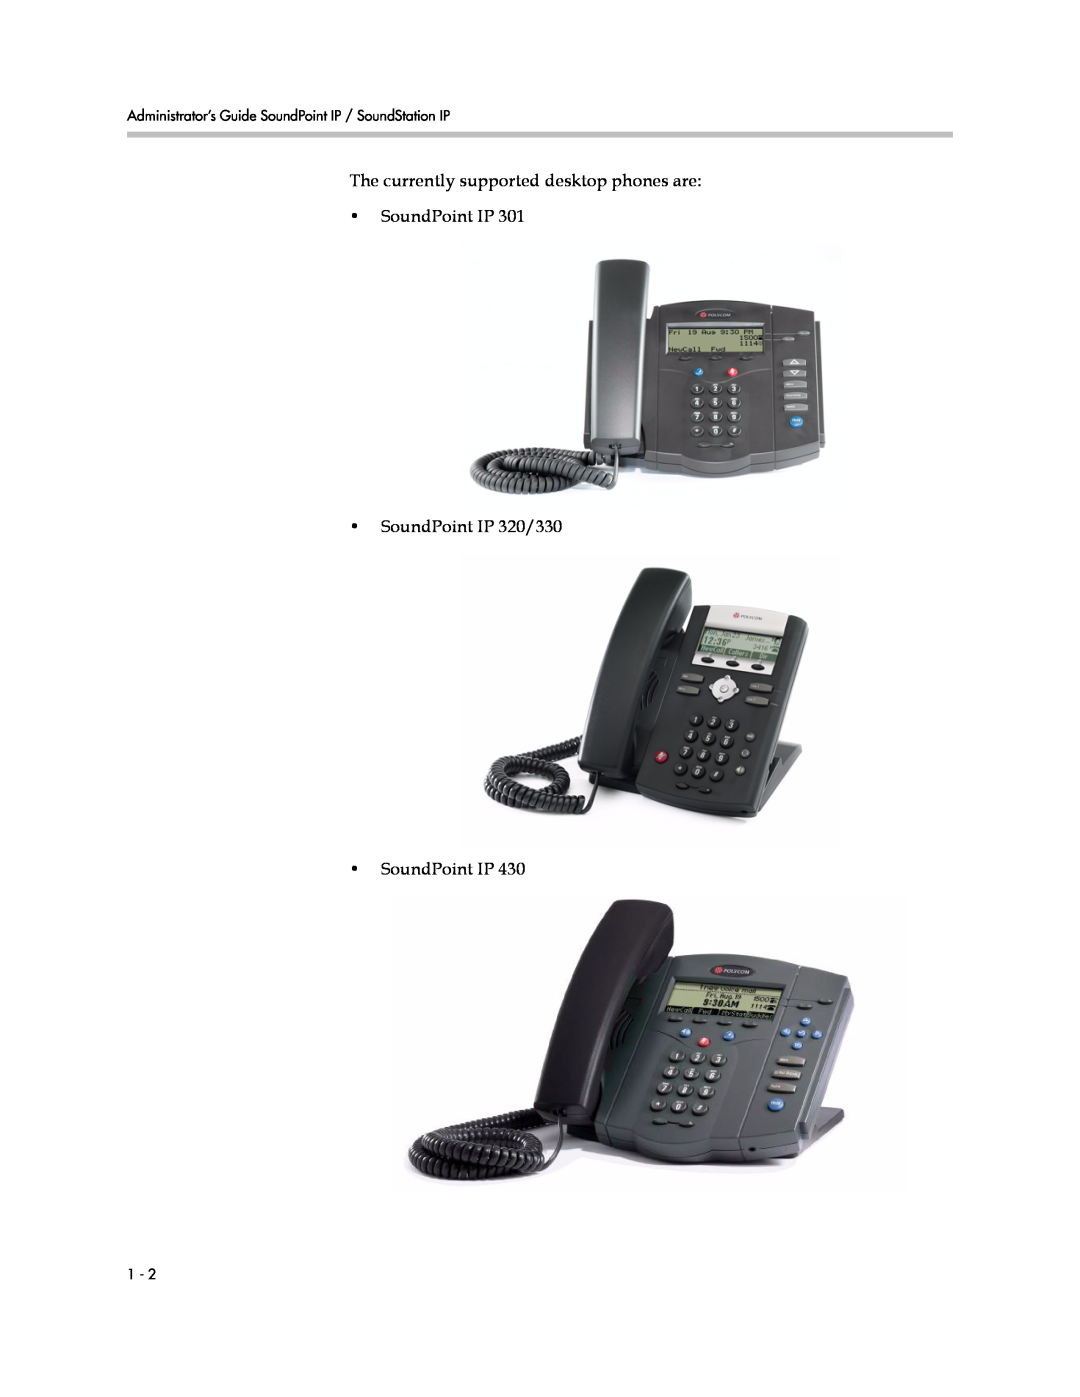 Polycom SIP 3.1 manual The currently supported desktop phones are SoundPoint IP, SoundPoint IP 320/330 SoundPoint IP 